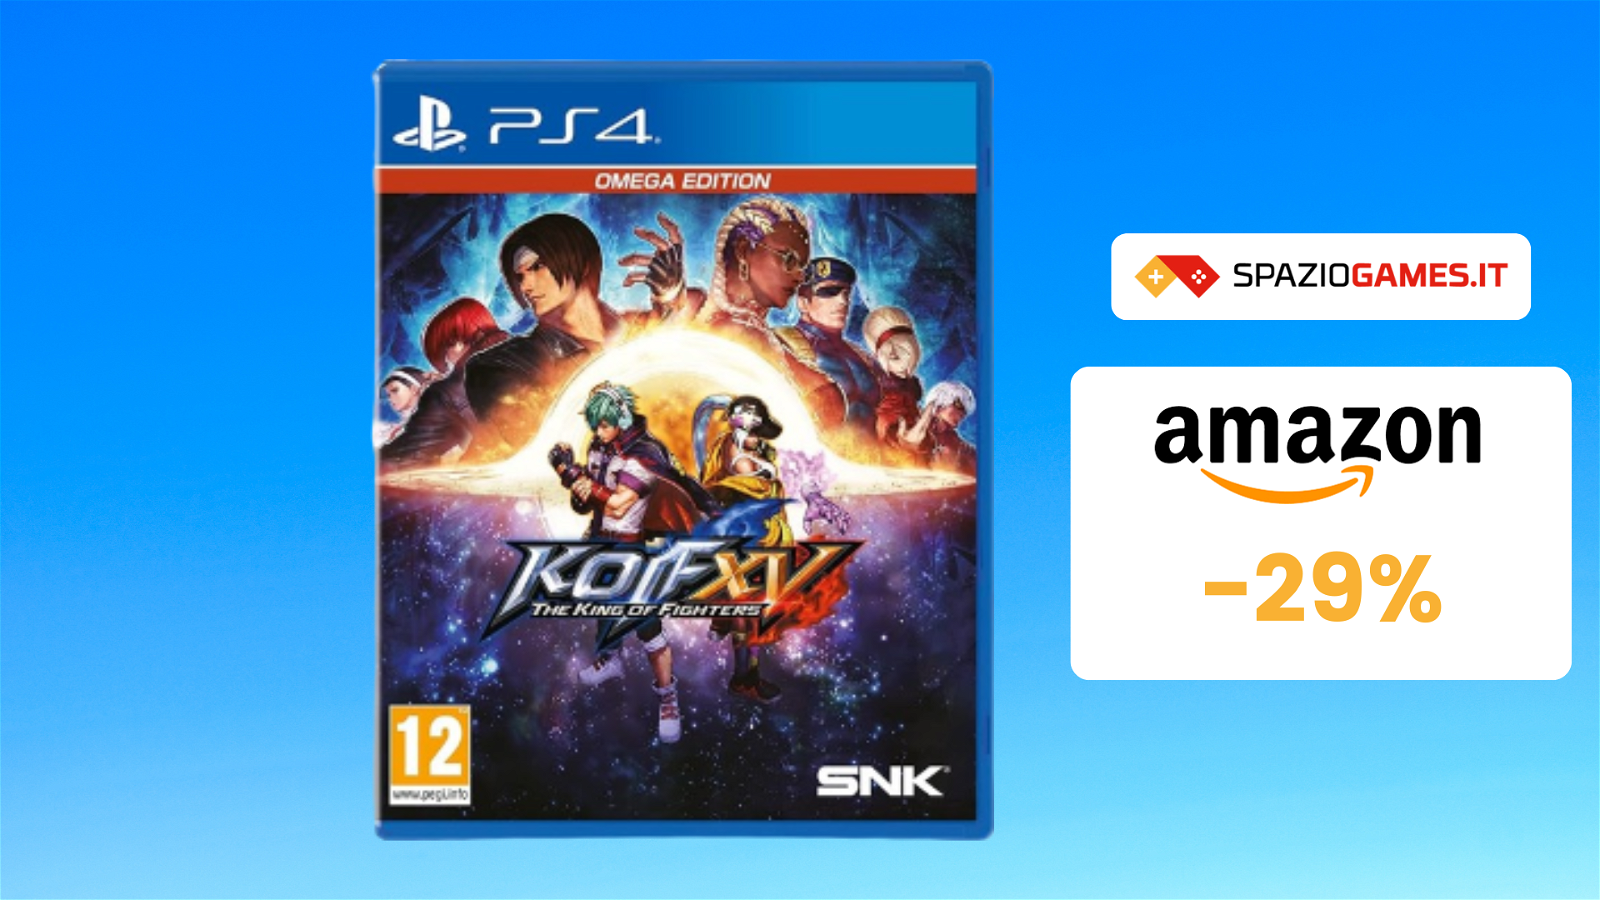 The King of Fighters XV - Omega Edition per PS4 a SOLI 25€!